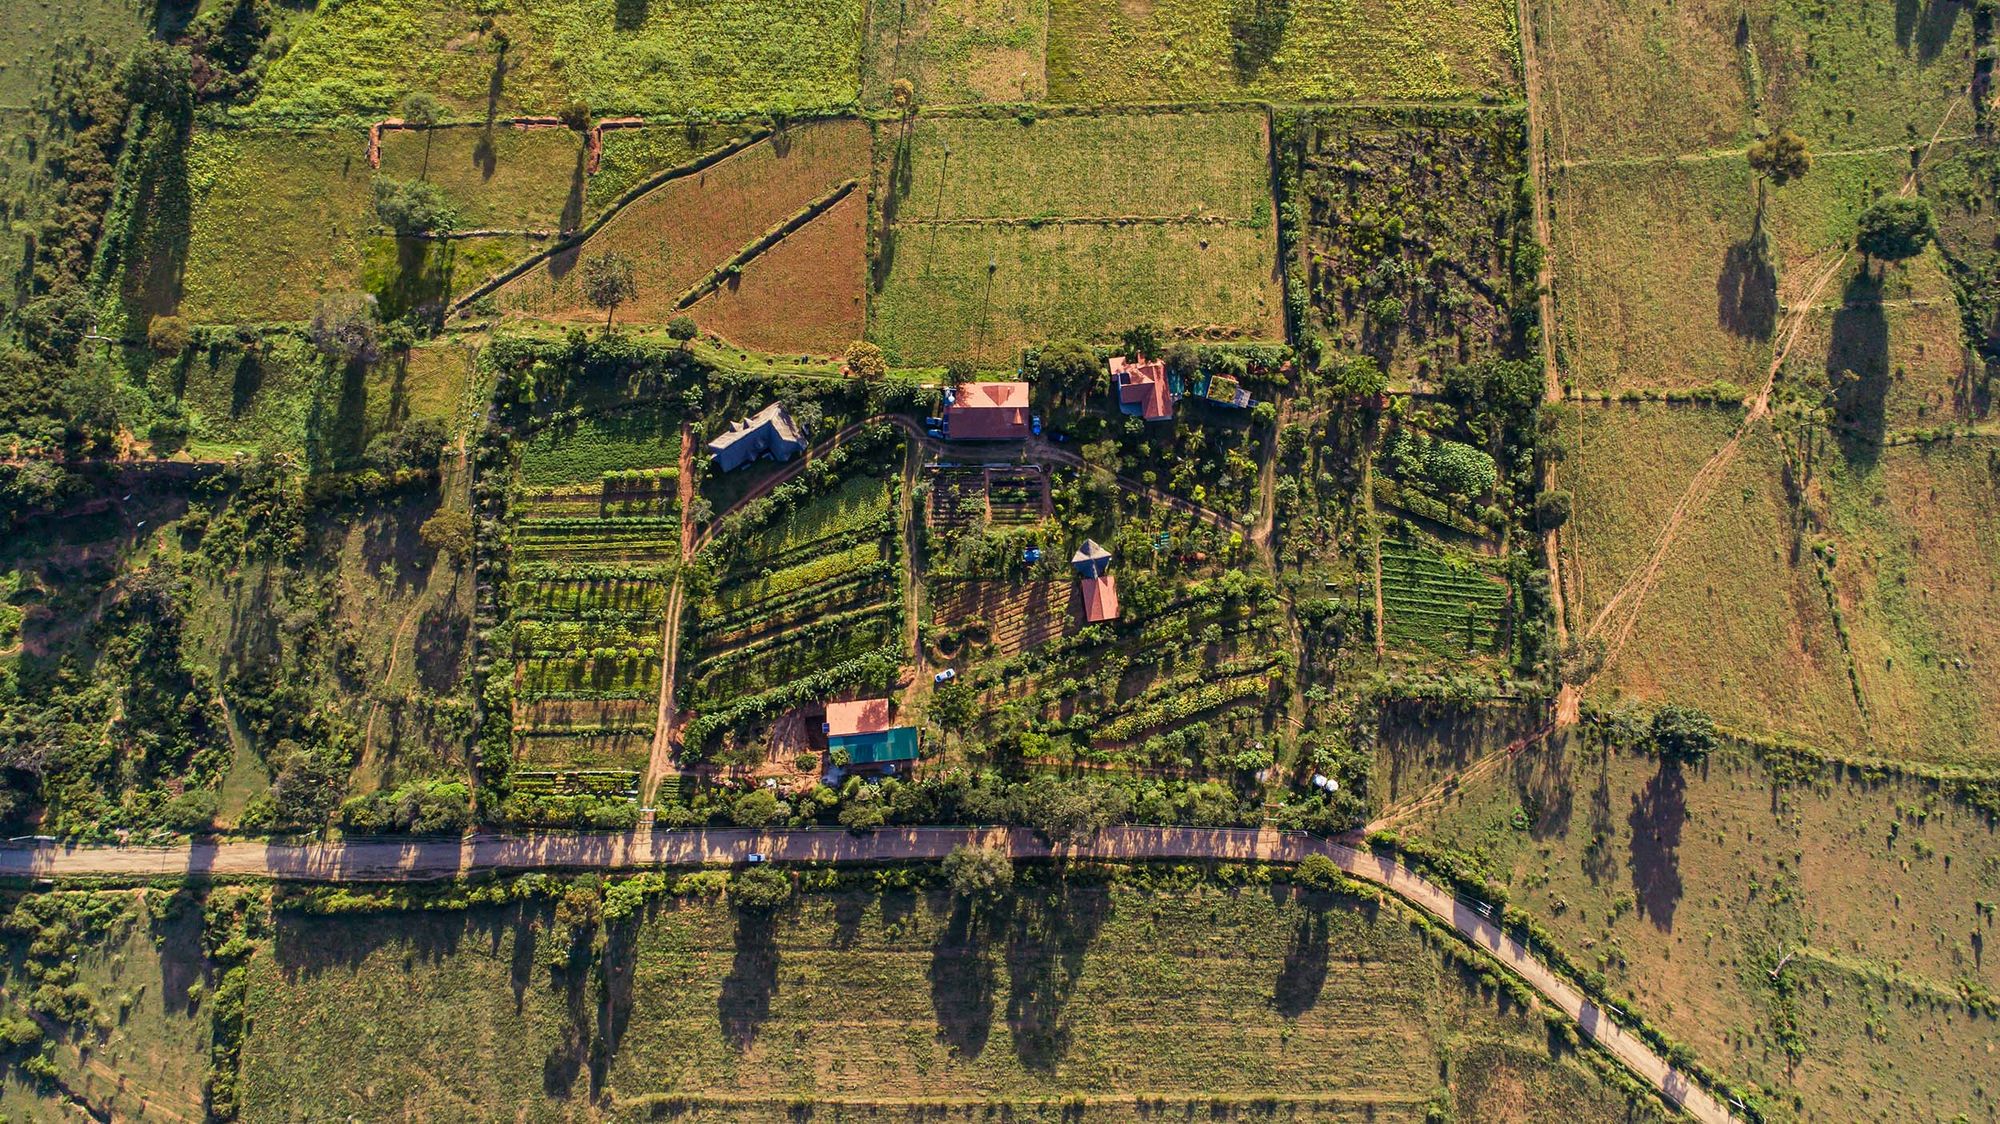 Aerial view of farmland with rows of crops and trees visible